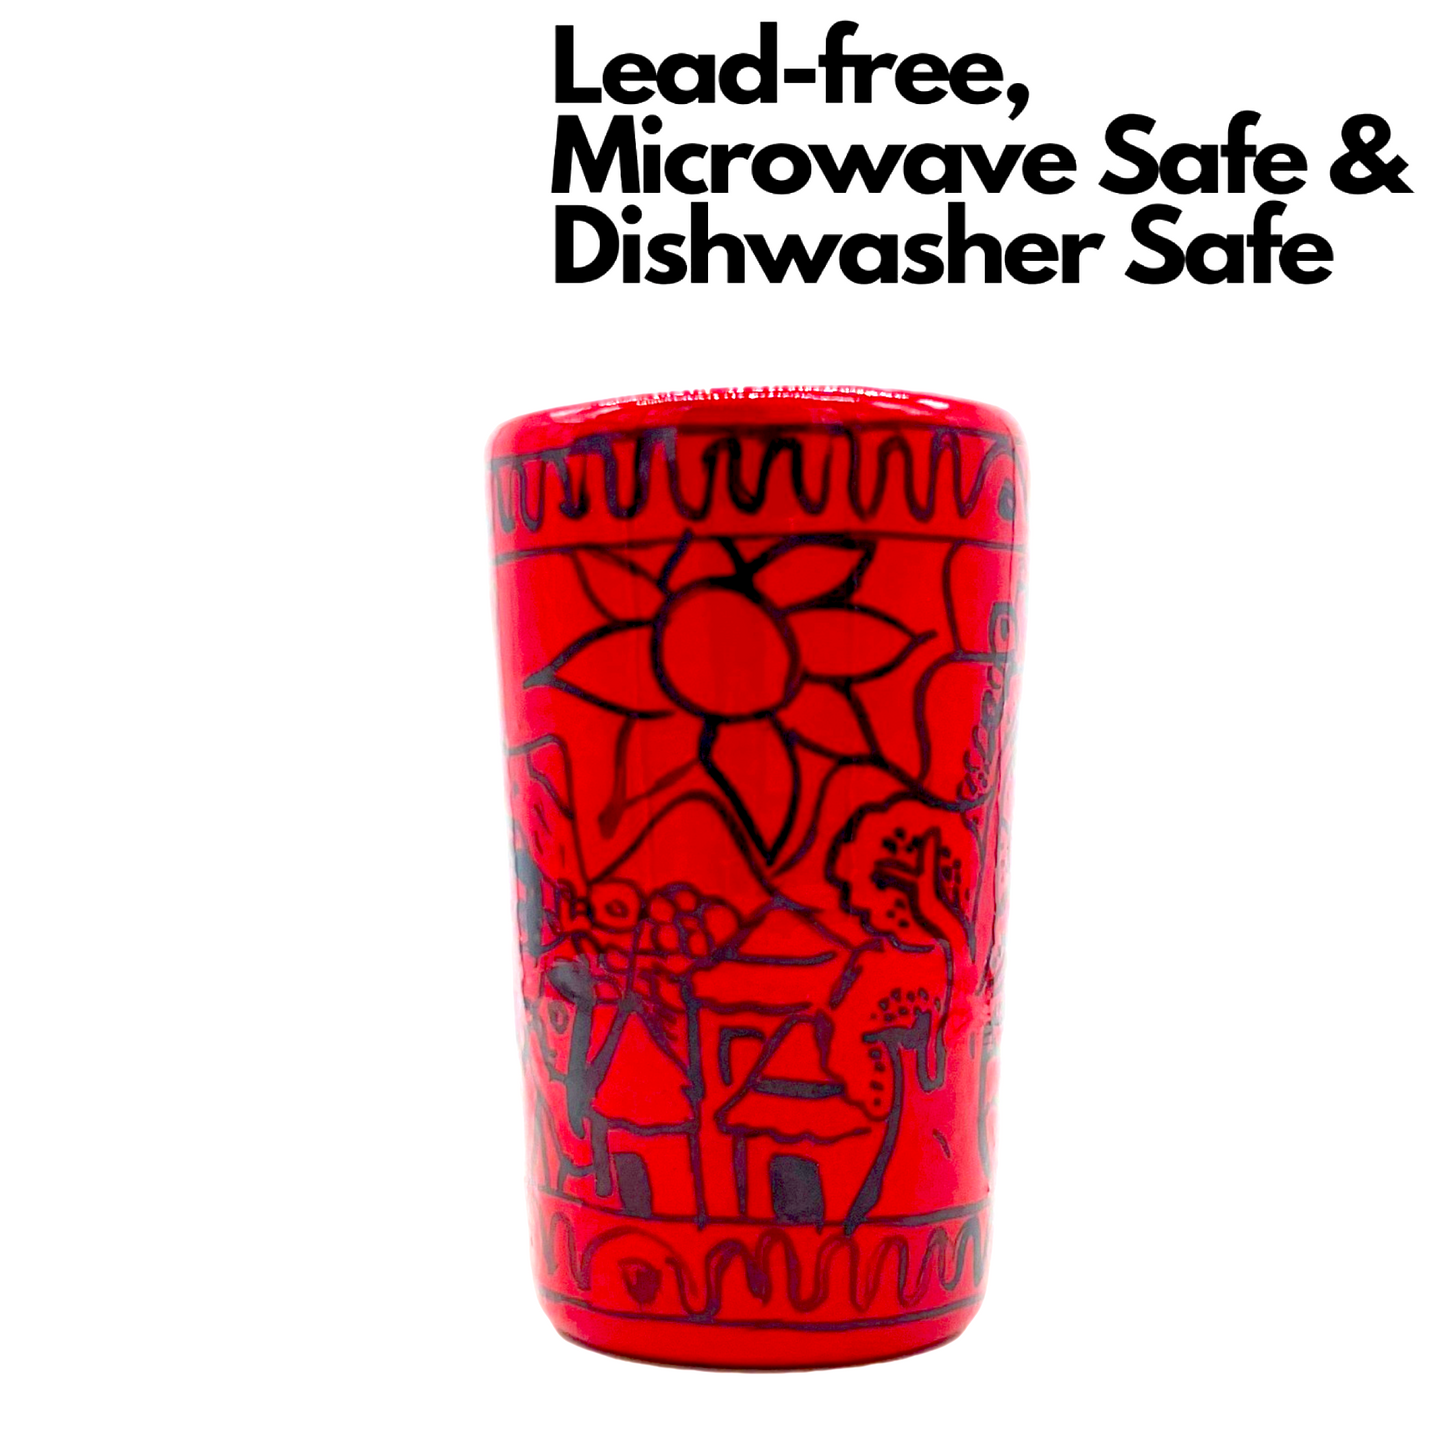 lead free microwave safe dishwasher safe red mexican shot glasses set of 2. handmade and handpainted in mexico